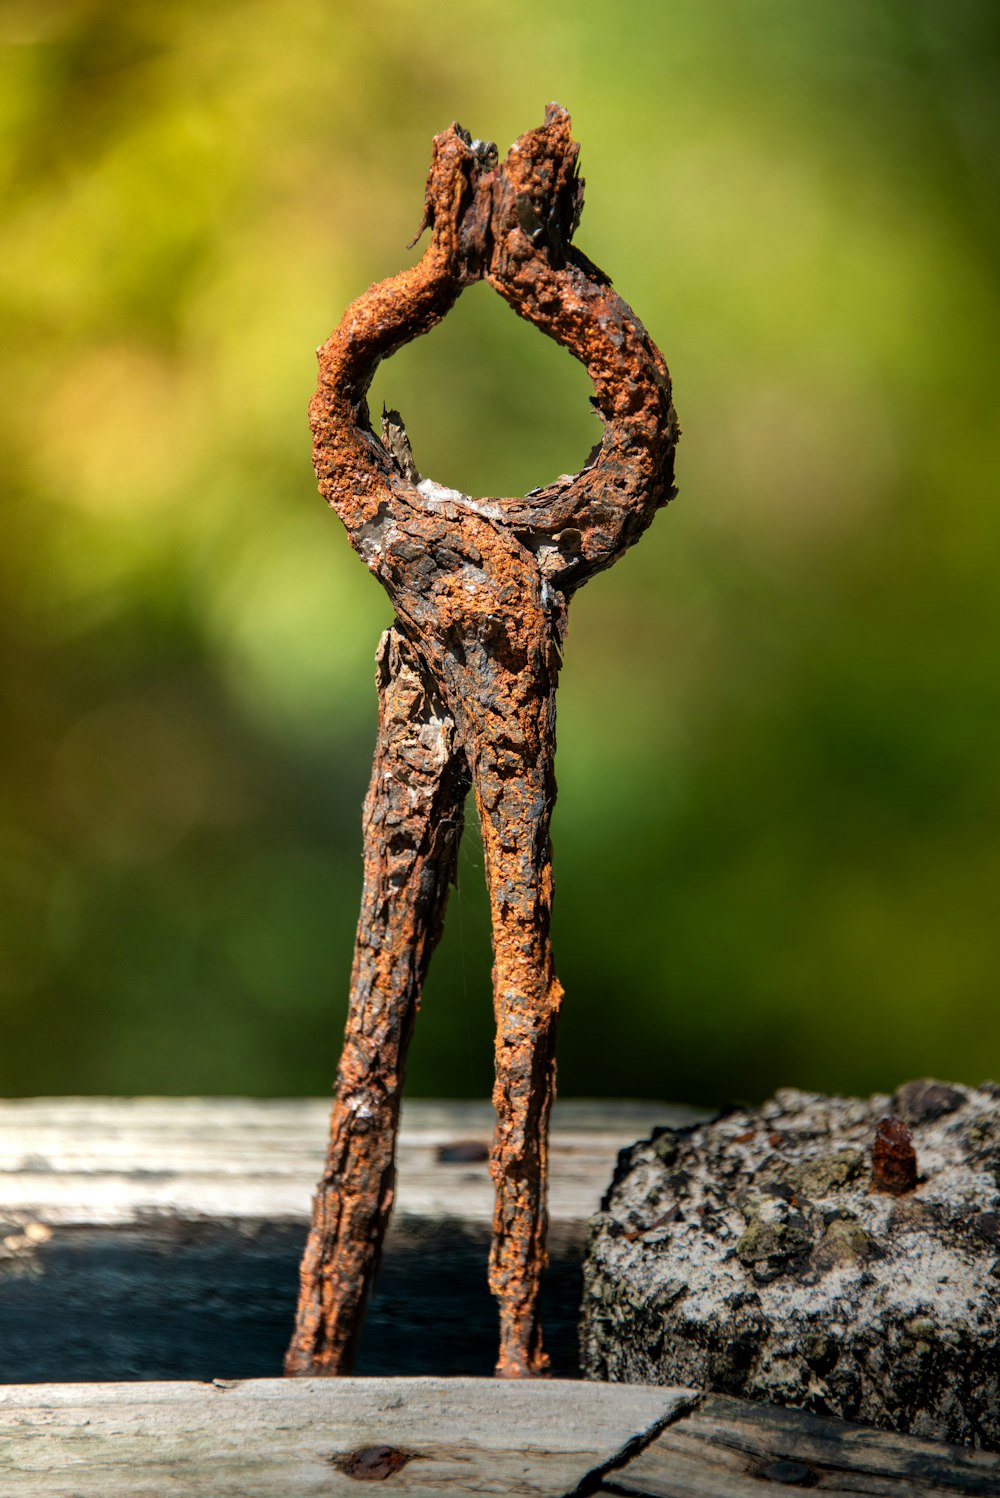 a rusted metal figure standing on a wooden surface